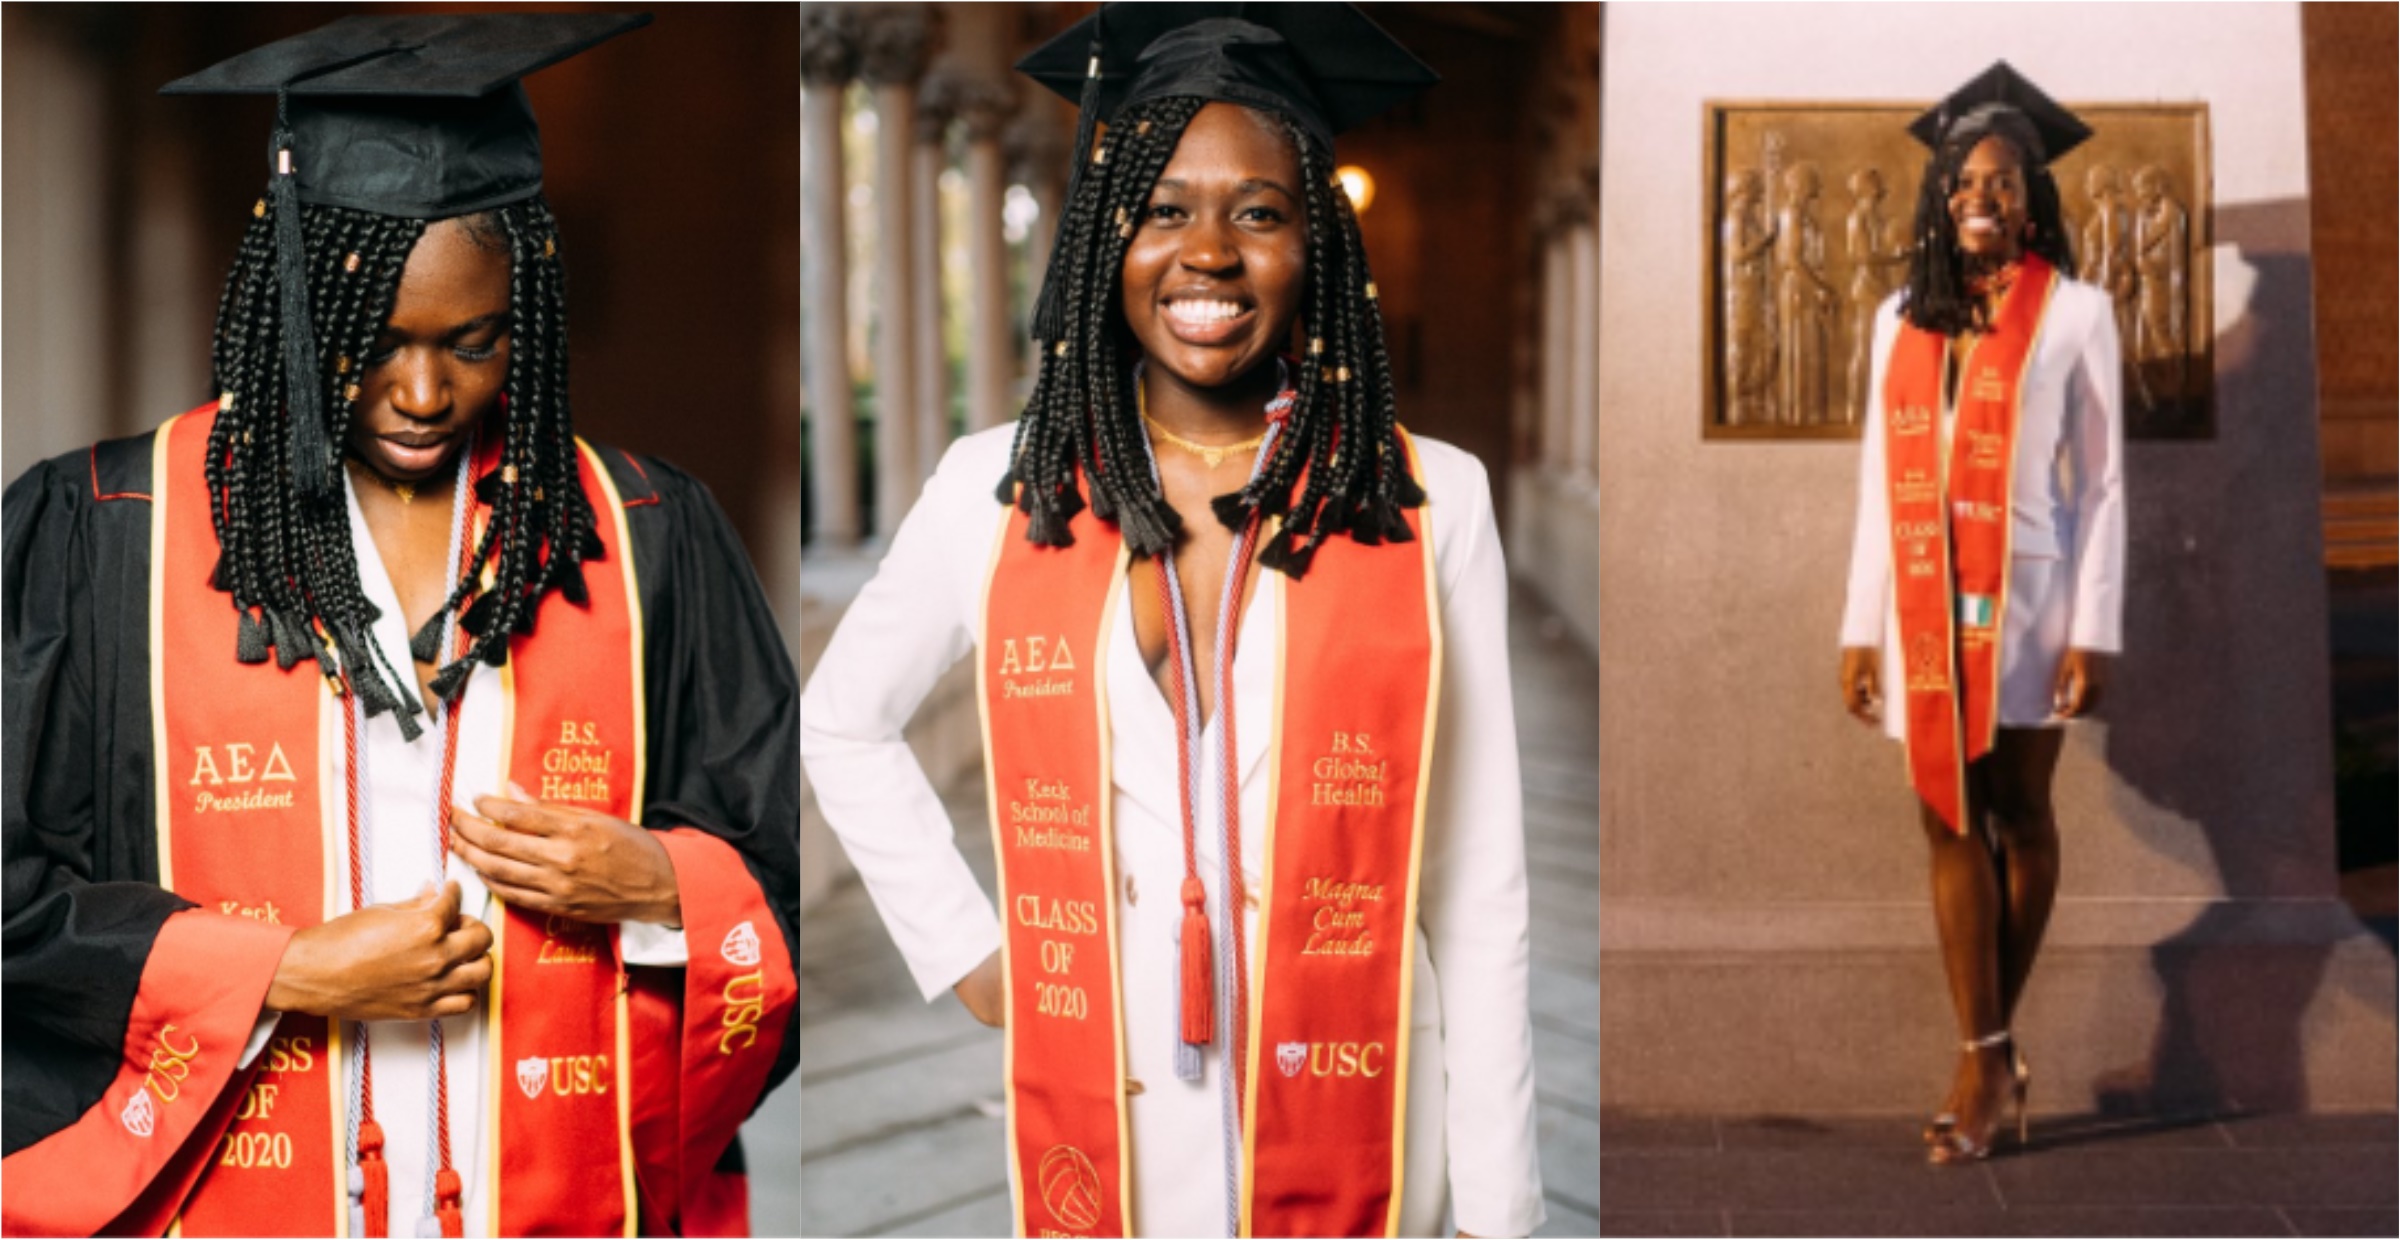 Black brilliance: Smart Lady graduates from top US university with degree in Science in Global Health